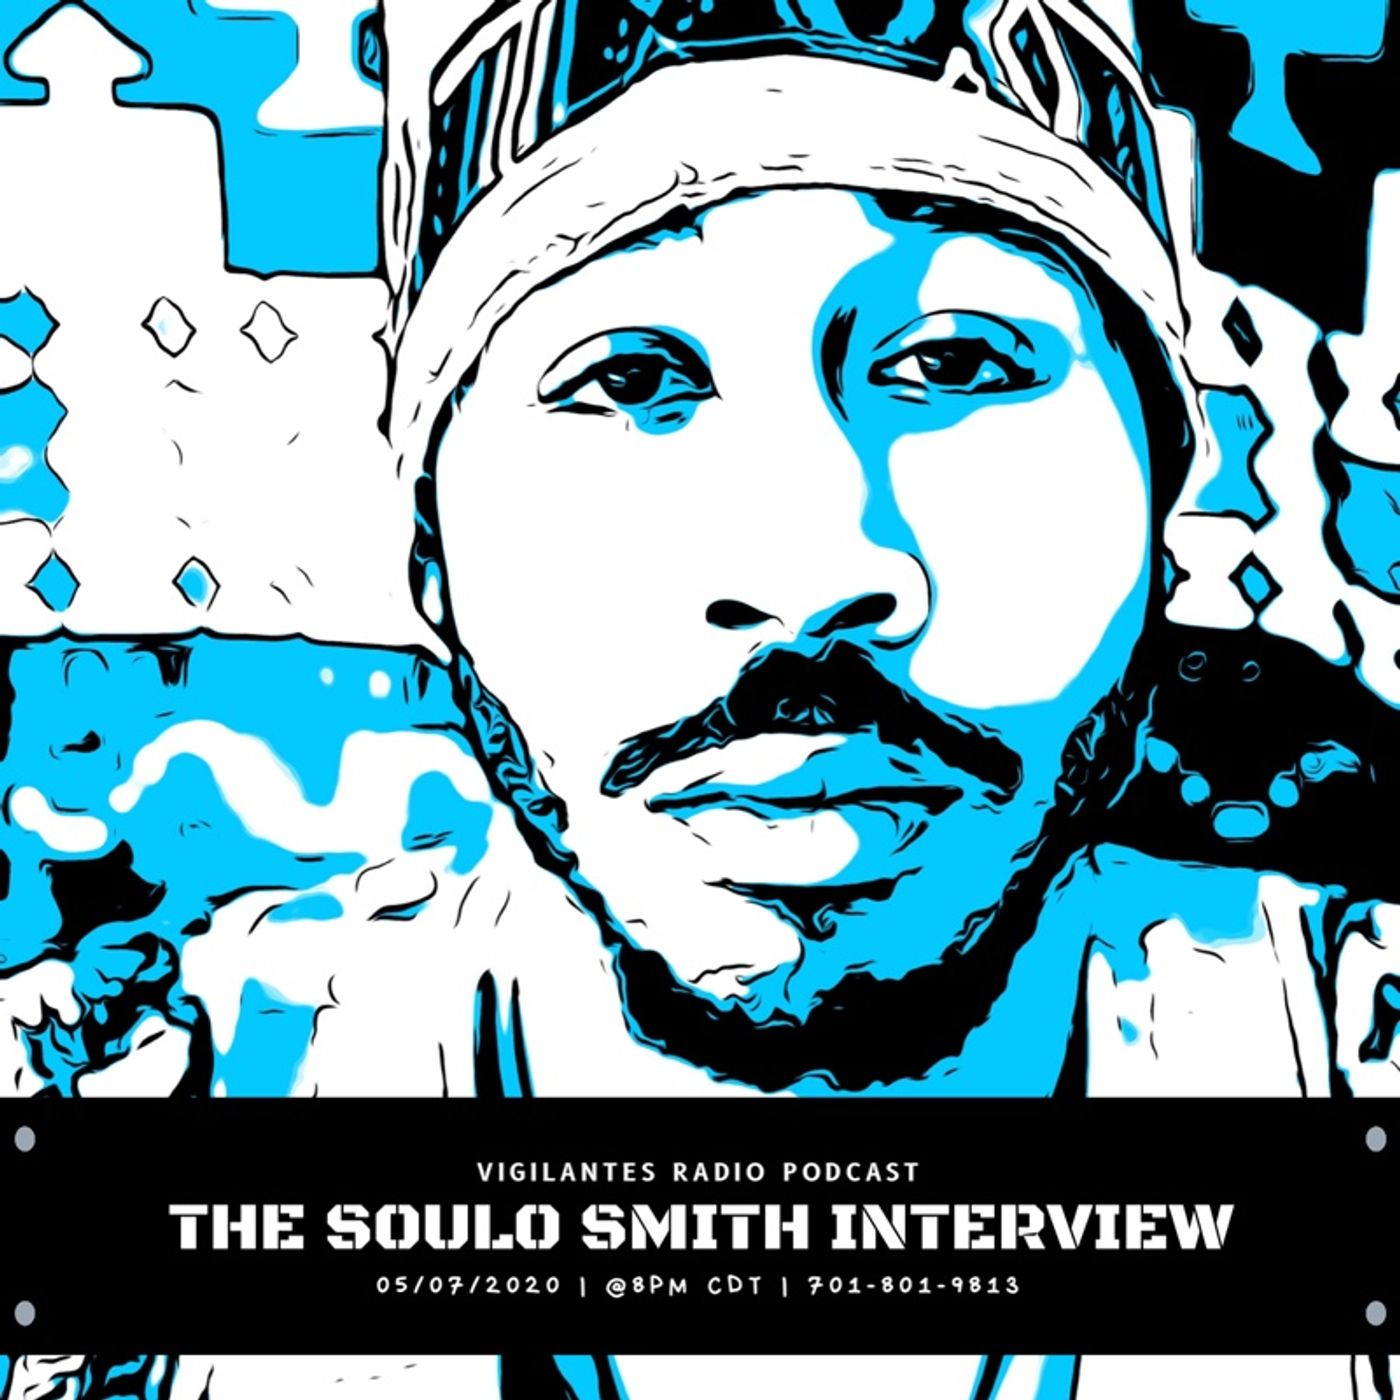 The Soulo Smith Interview. Image